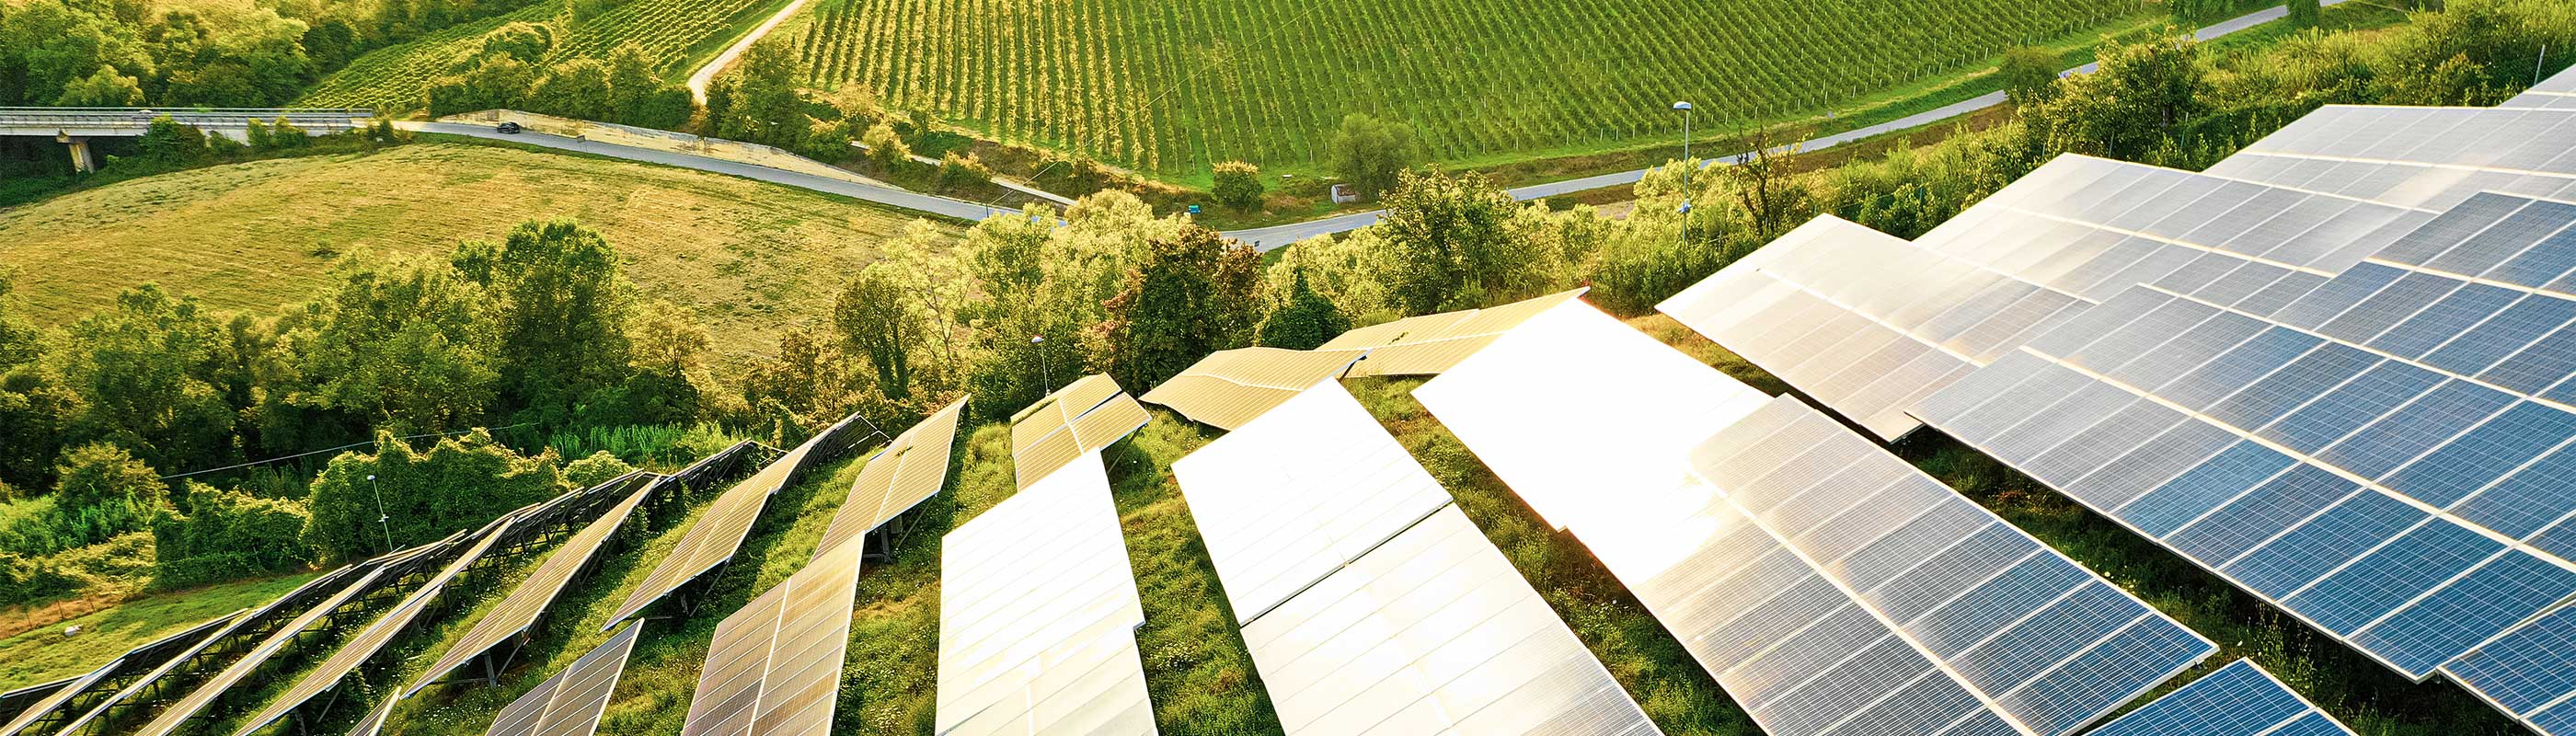 An image of green fields and a group of solar panels